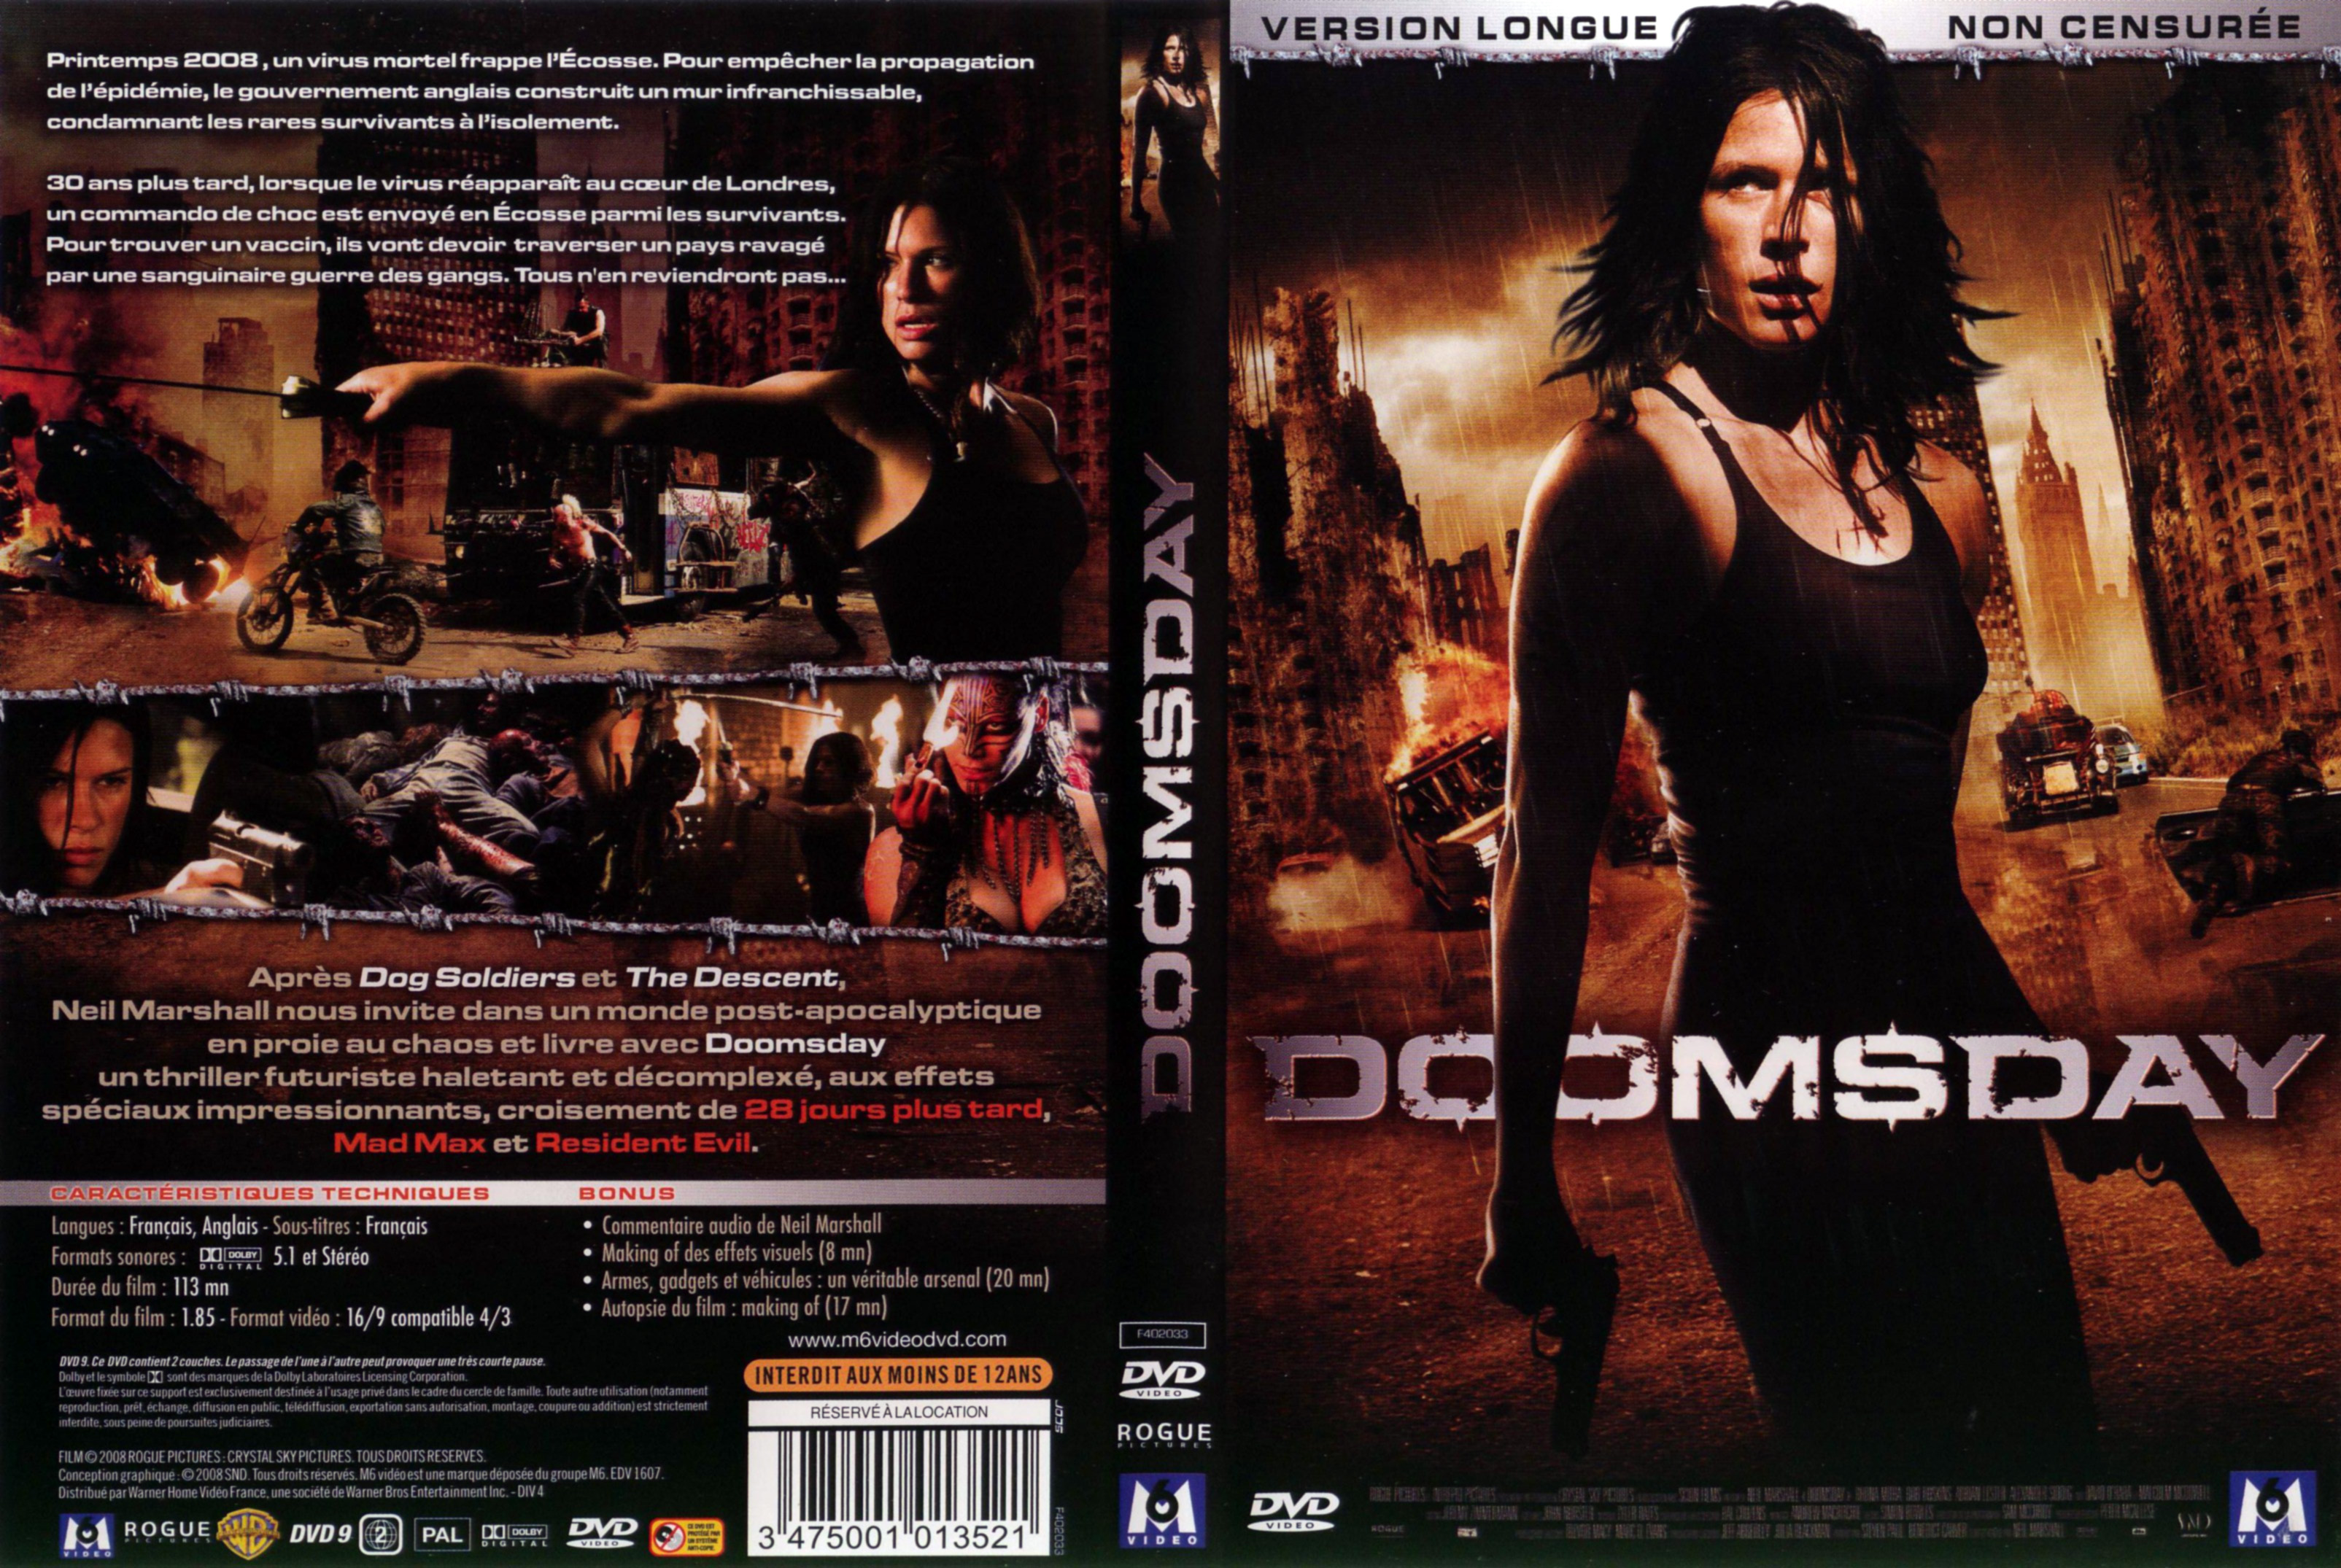 Jaquette DVD Doomsday